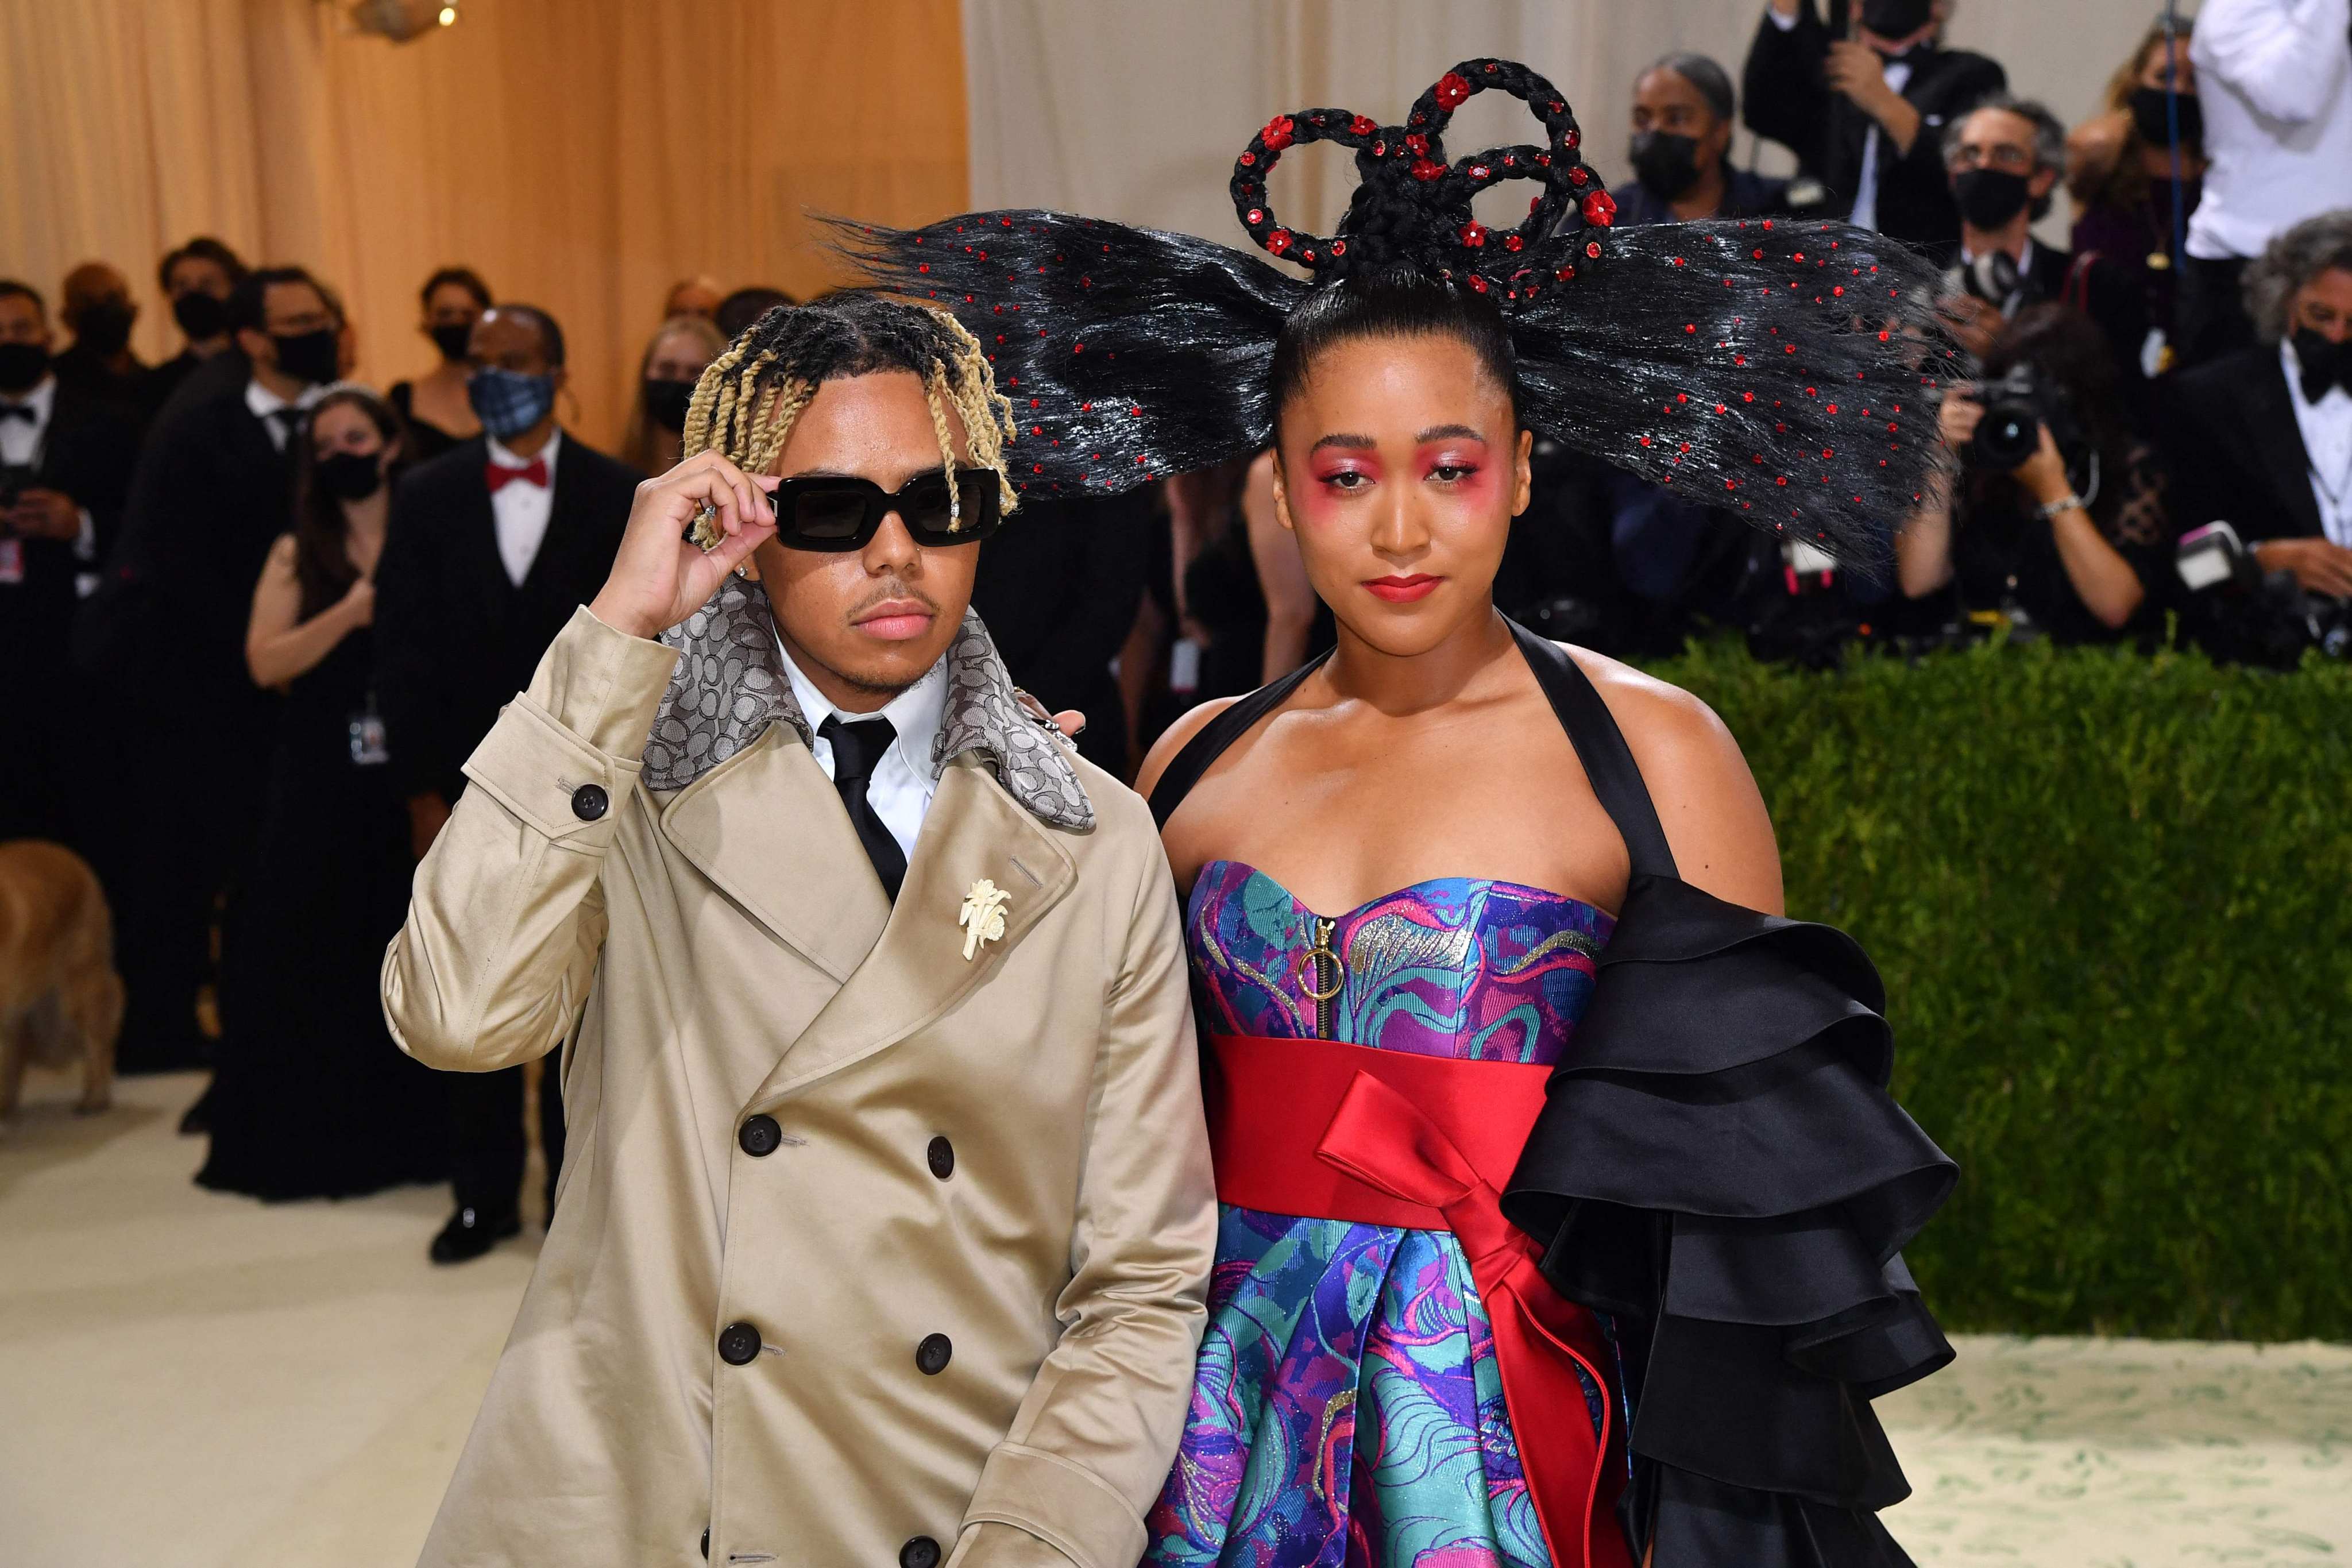 Japanese tennis player Naomi Osaka and US singer Cordae arrive for the 2021 Met Gala at the Metropolitan Museum of Art on September 13 in New York. Photo: AFP